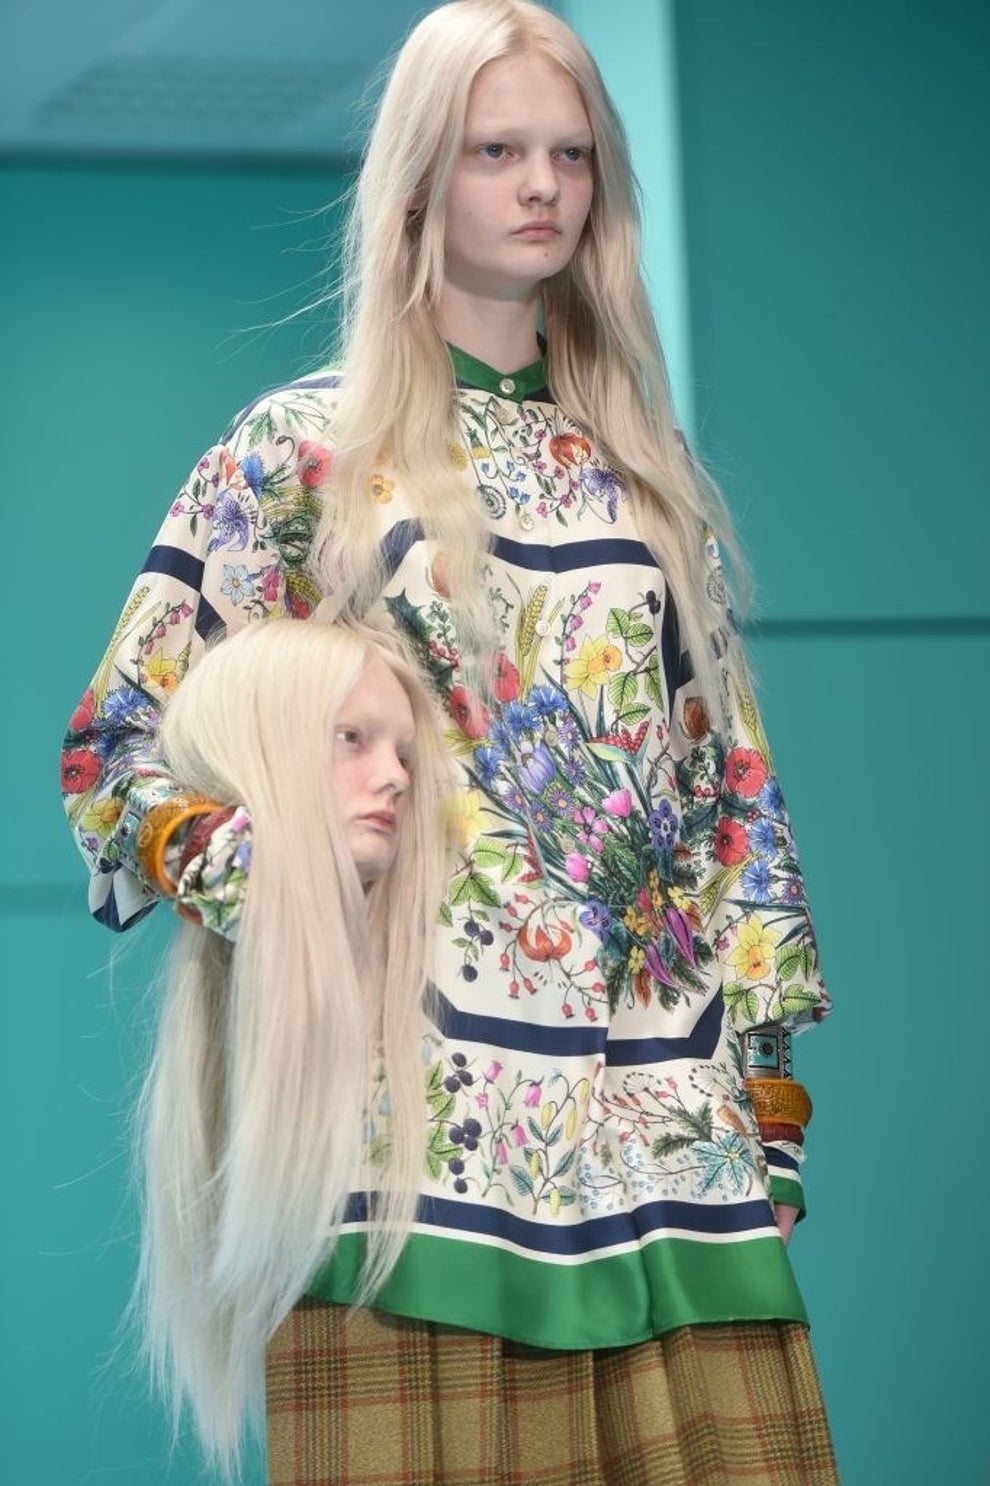 Gucci Models Carried Replicas Of Their Own Heads Down The Runway And It's  Honestly A Mood